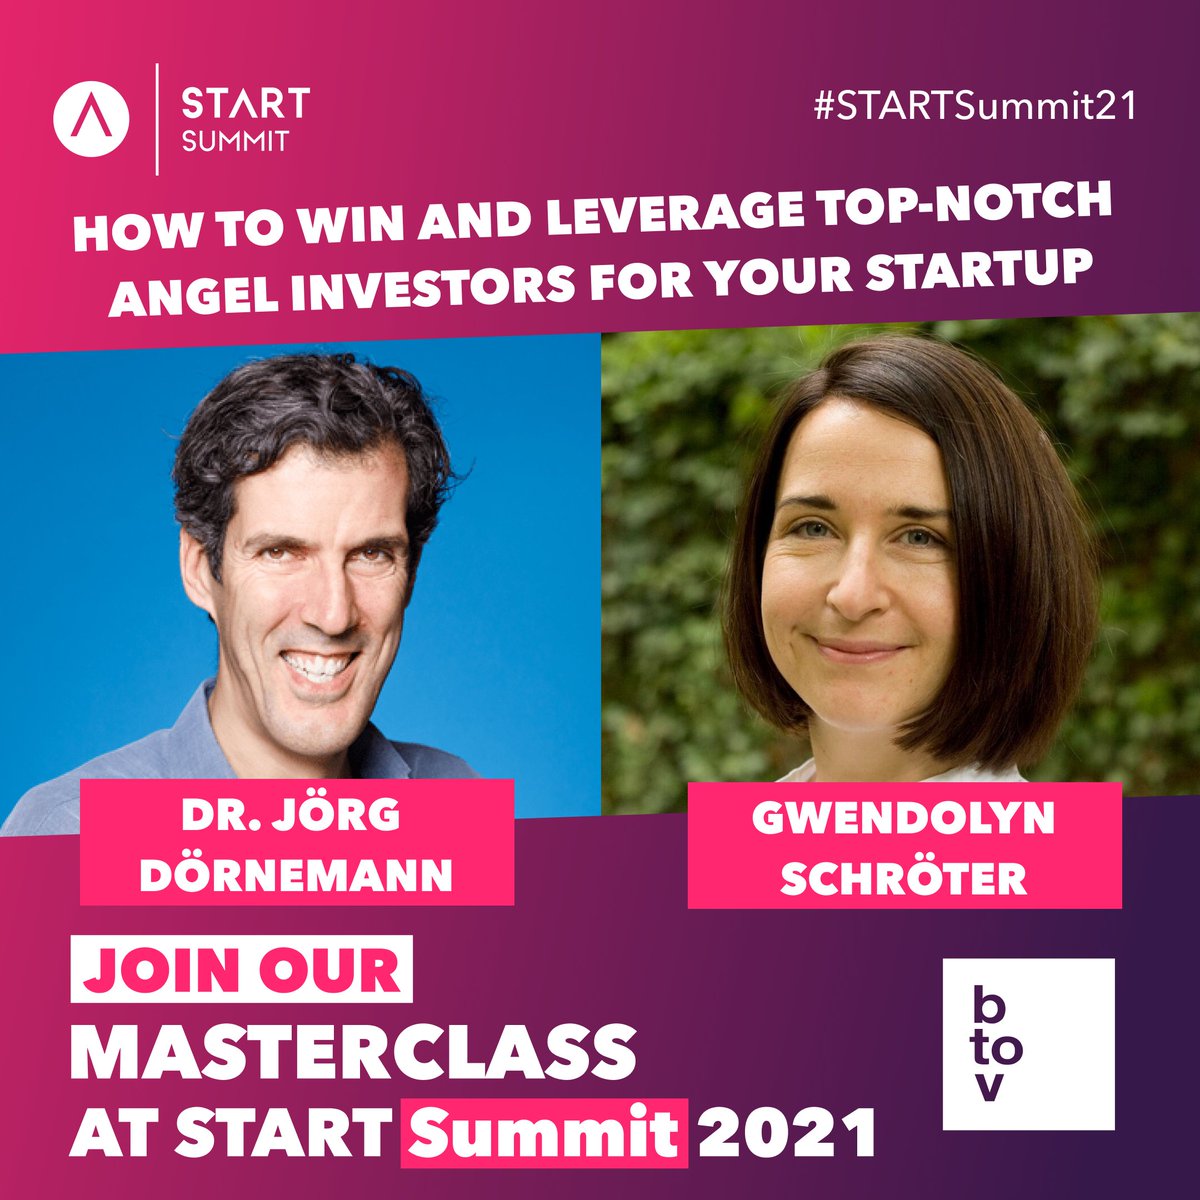 Join our Masterclass on Thursday the 25th of March at 5:30-6 pm CET to listen to Jörg Dörnemann, Partner at btov Partners, and Gwendolyn Schröter, Managing Director at Golzern Holding answering the question: “How to win and leverage top-notch Angel Investors for your startup”